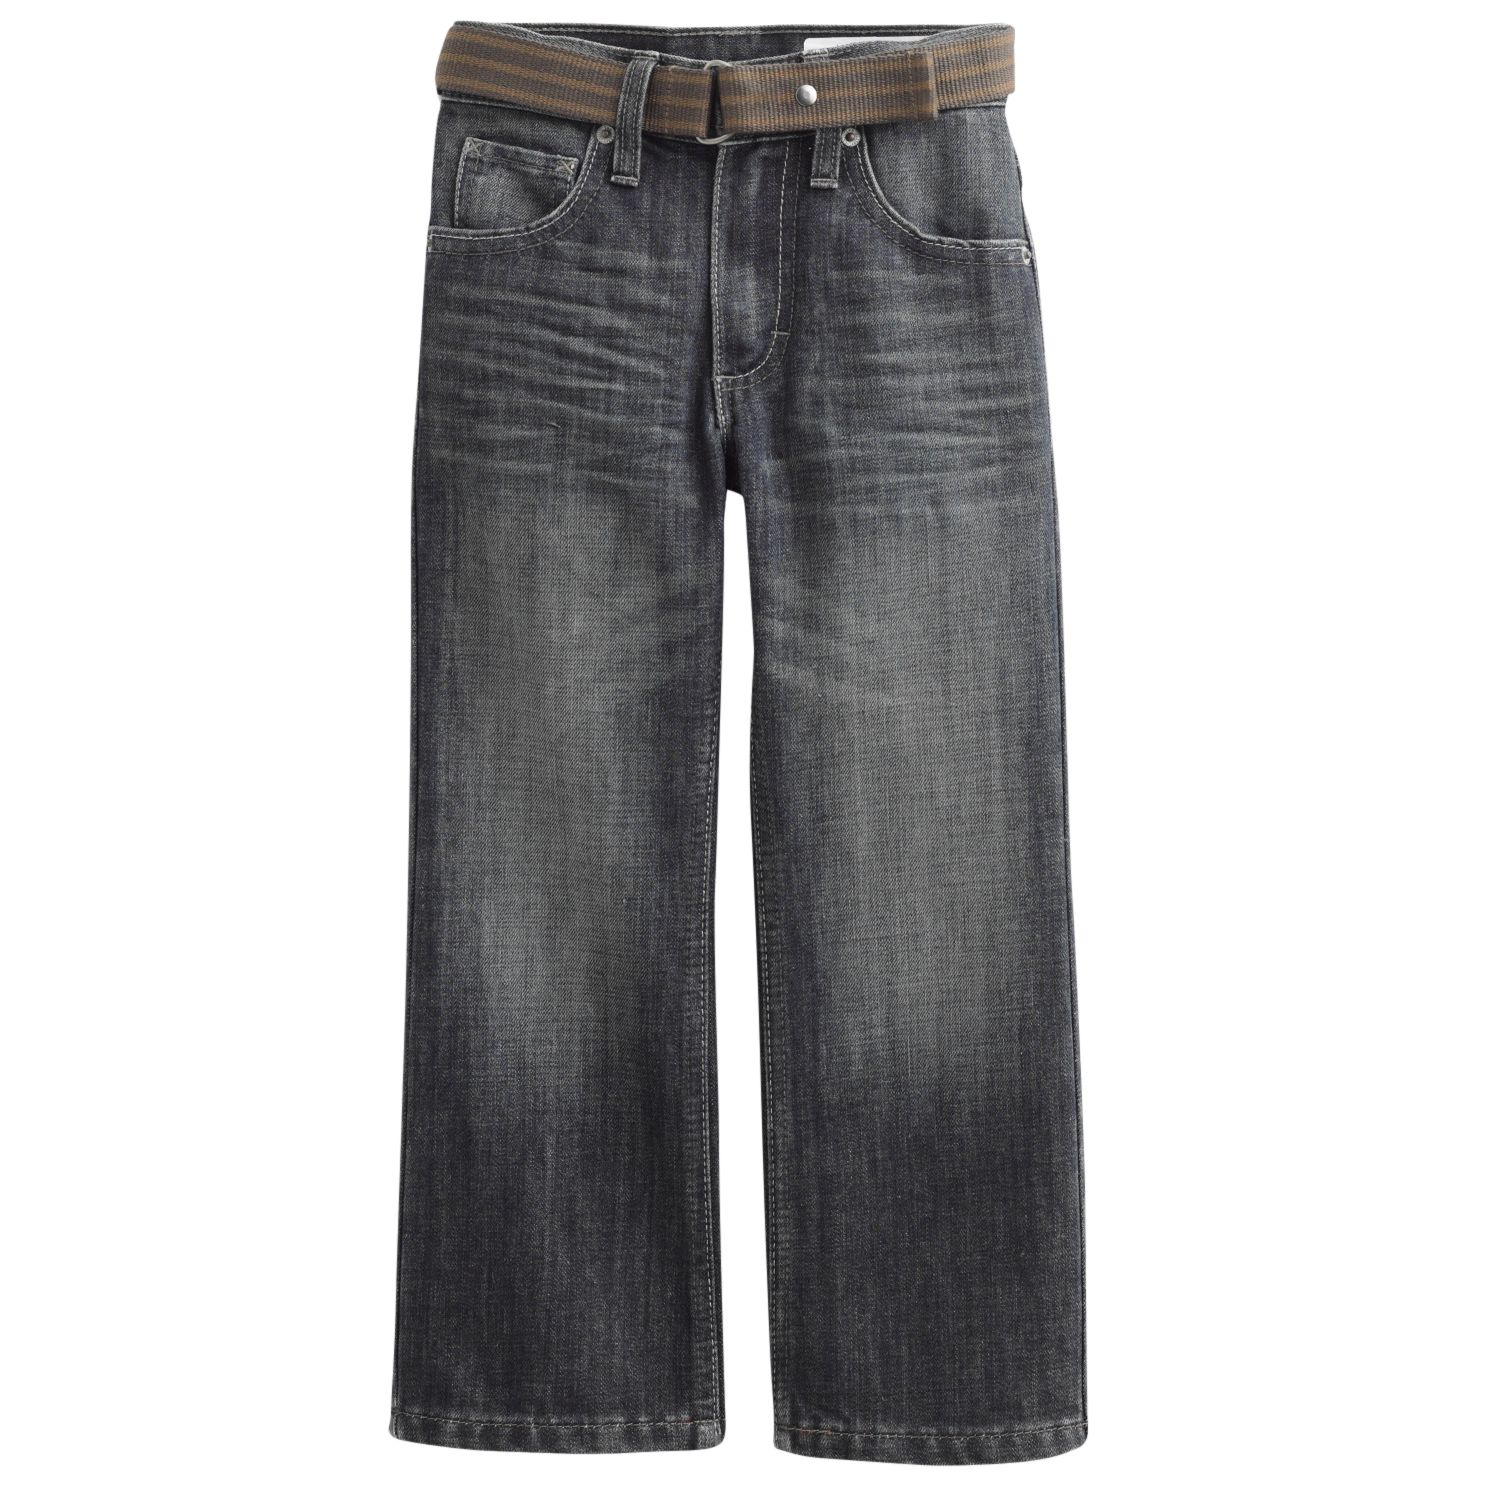 lee dungaree bootcut jeans